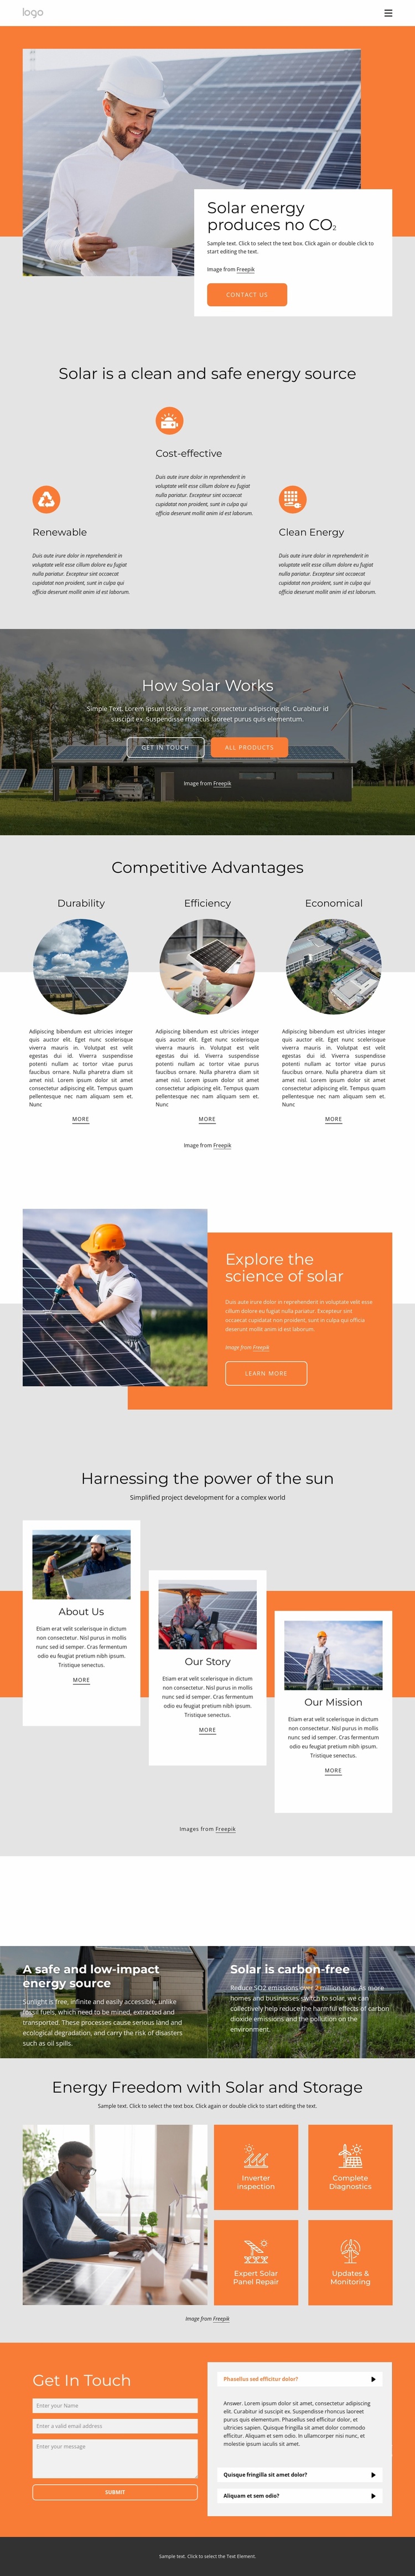 Power your home with clean solar energy eCommerce Template